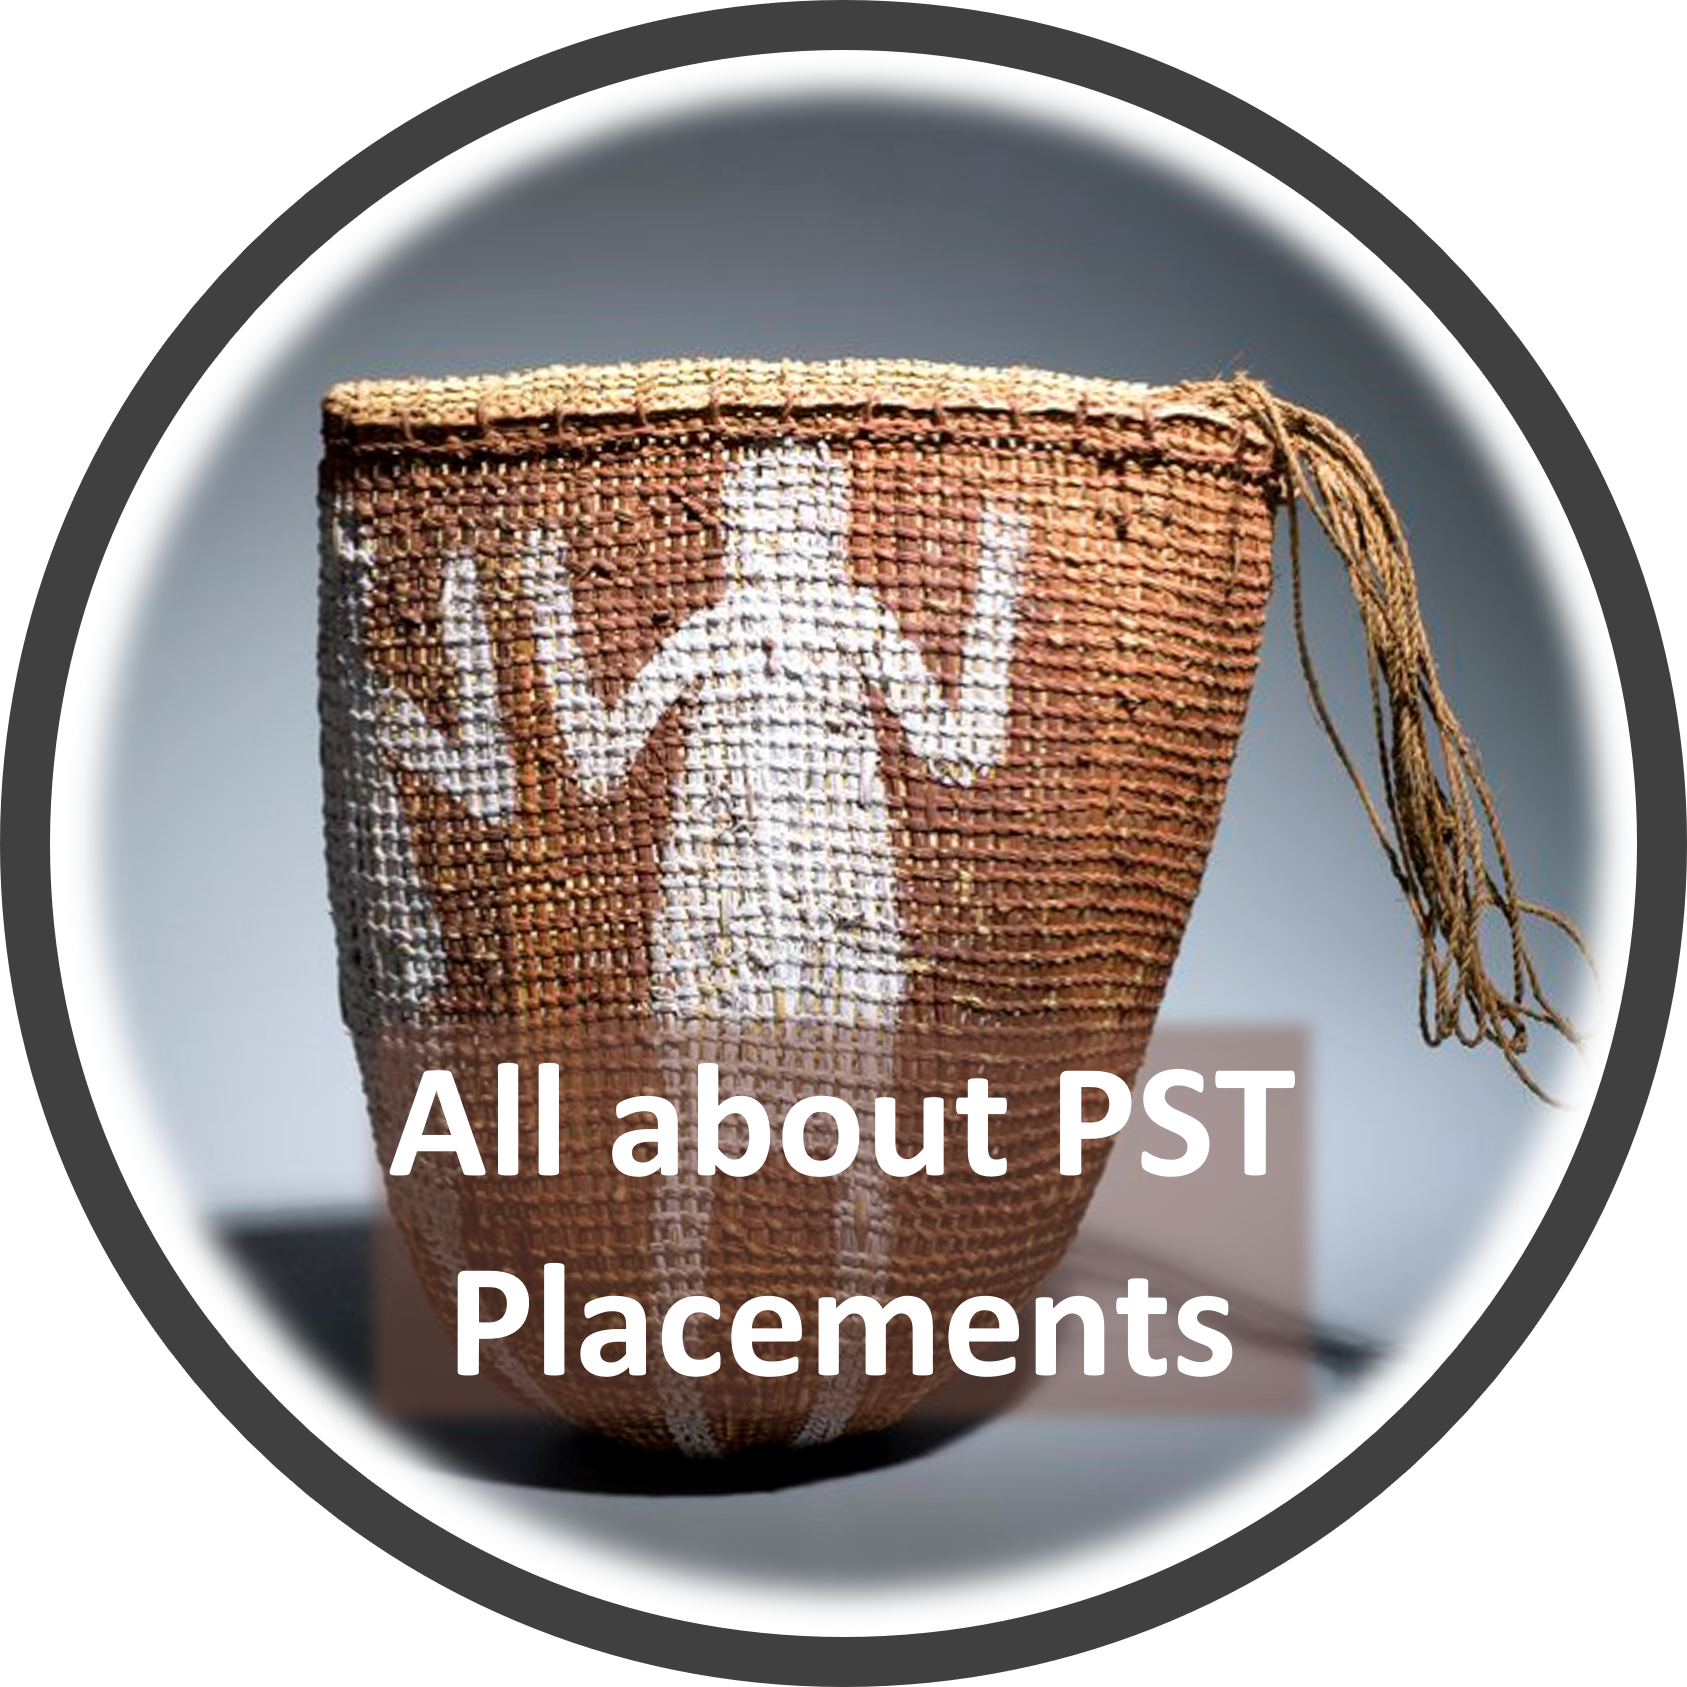 All about PST Placements icon